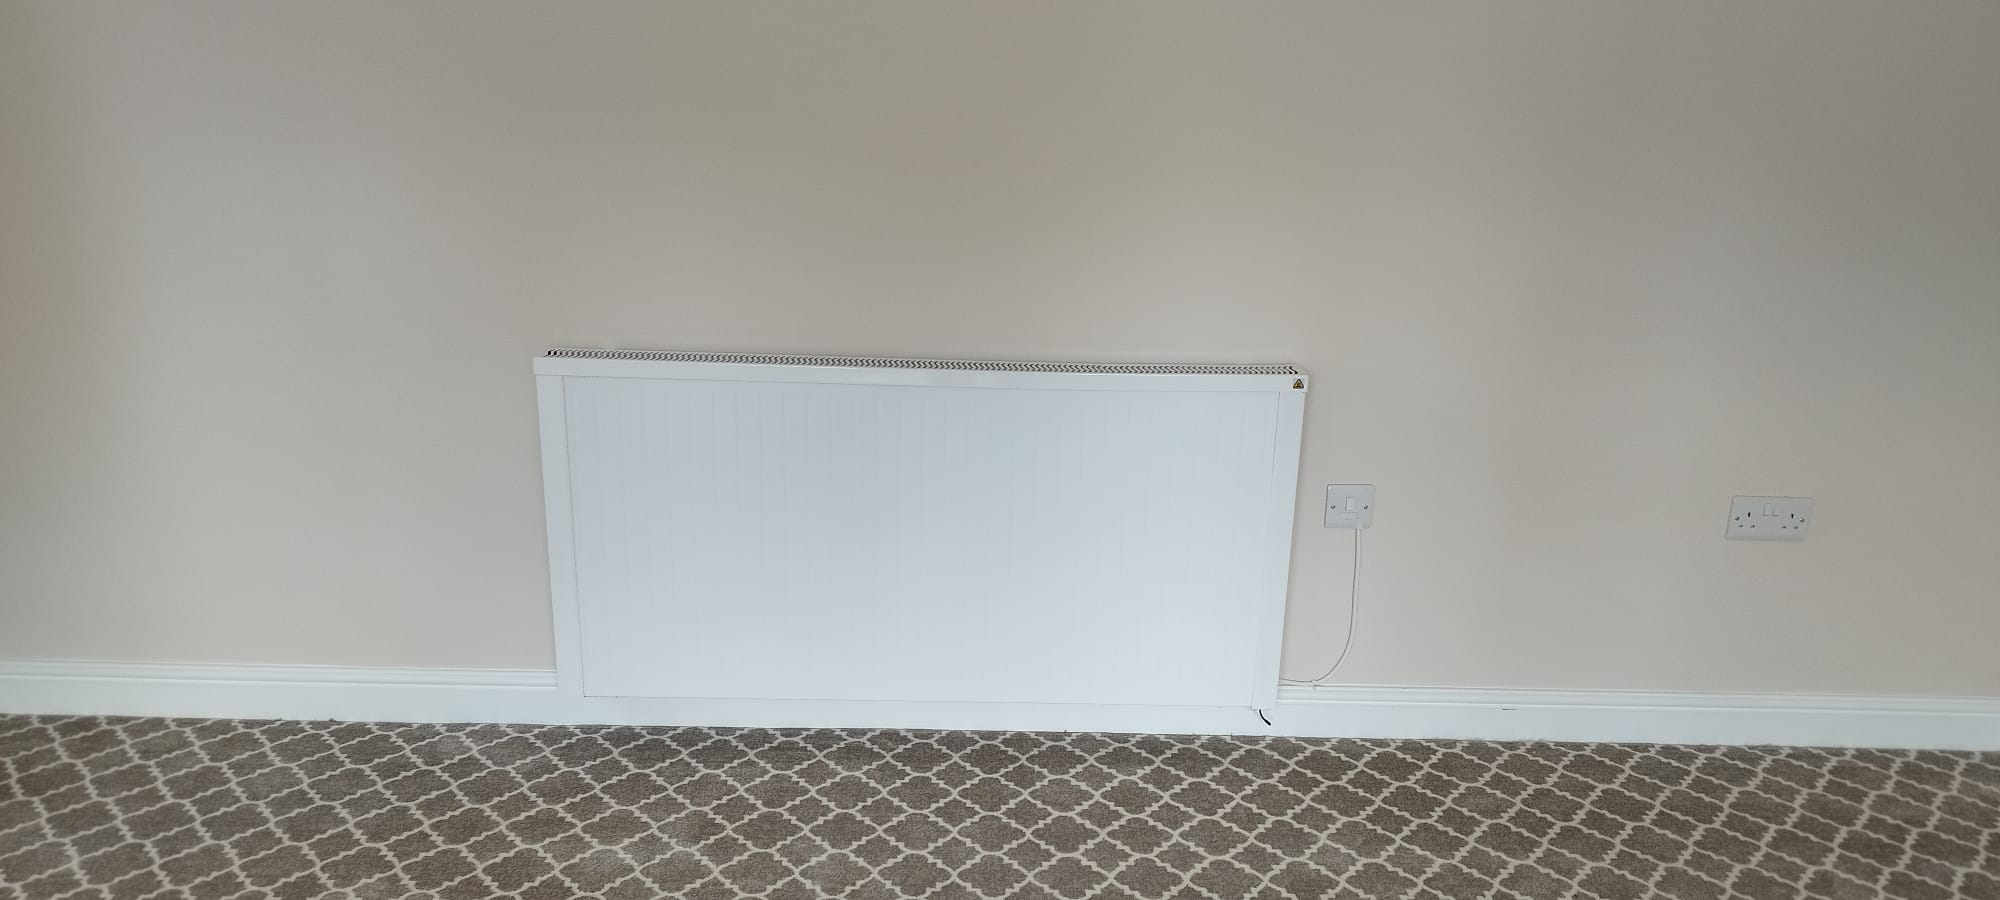 An image of an eco-friendly heating system that provides an alternative to electric heating.